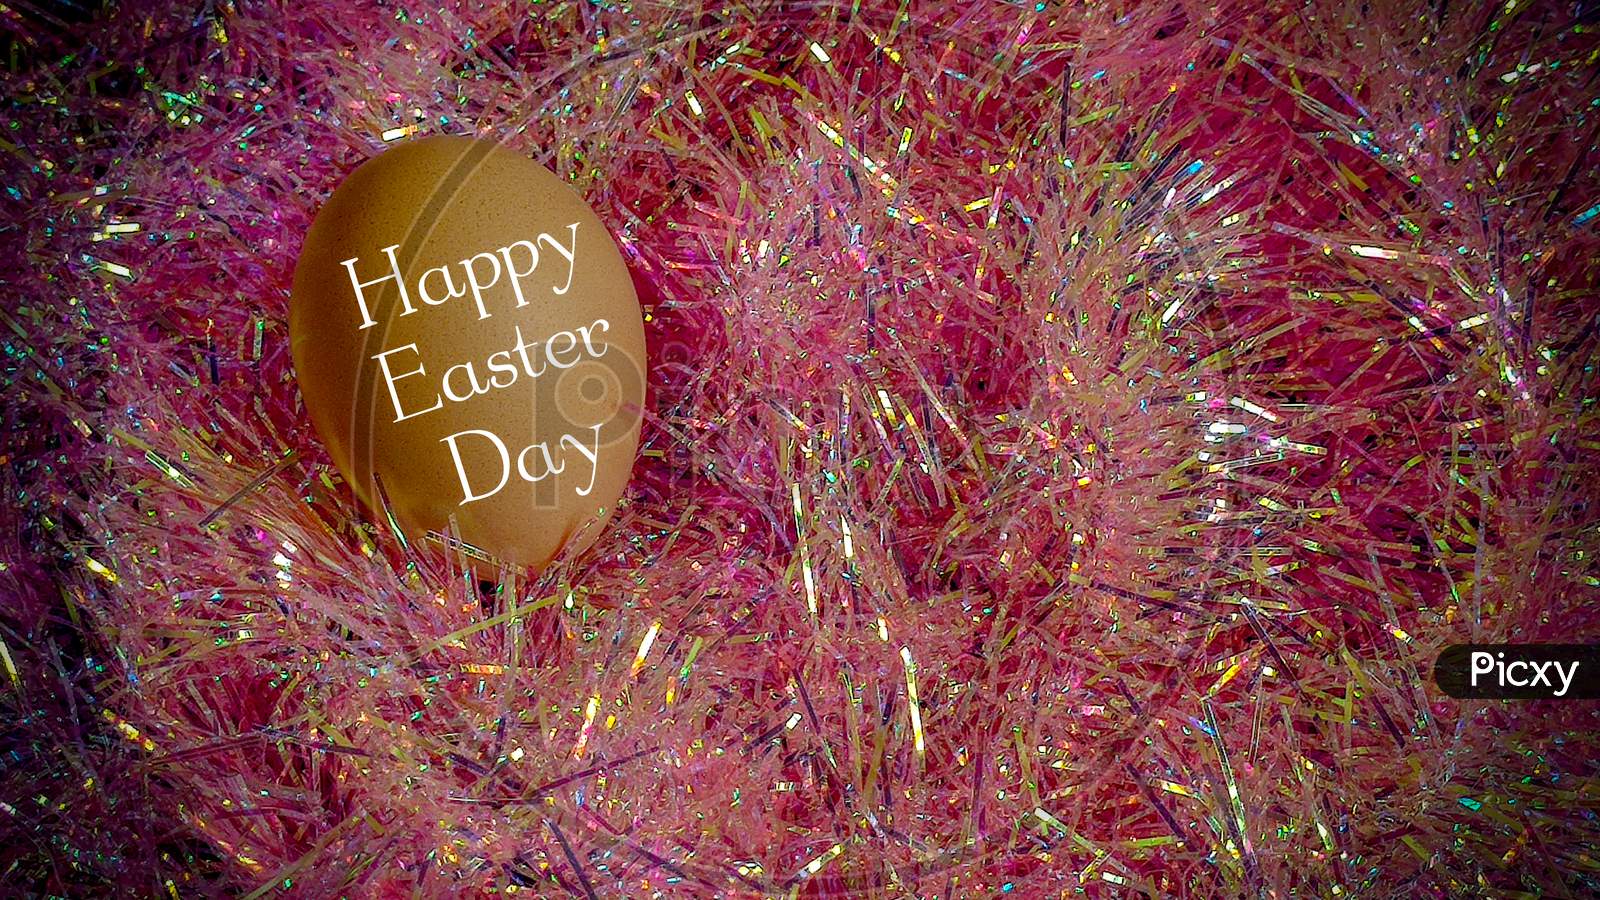 Happy Easter Day Greetings On a Egg